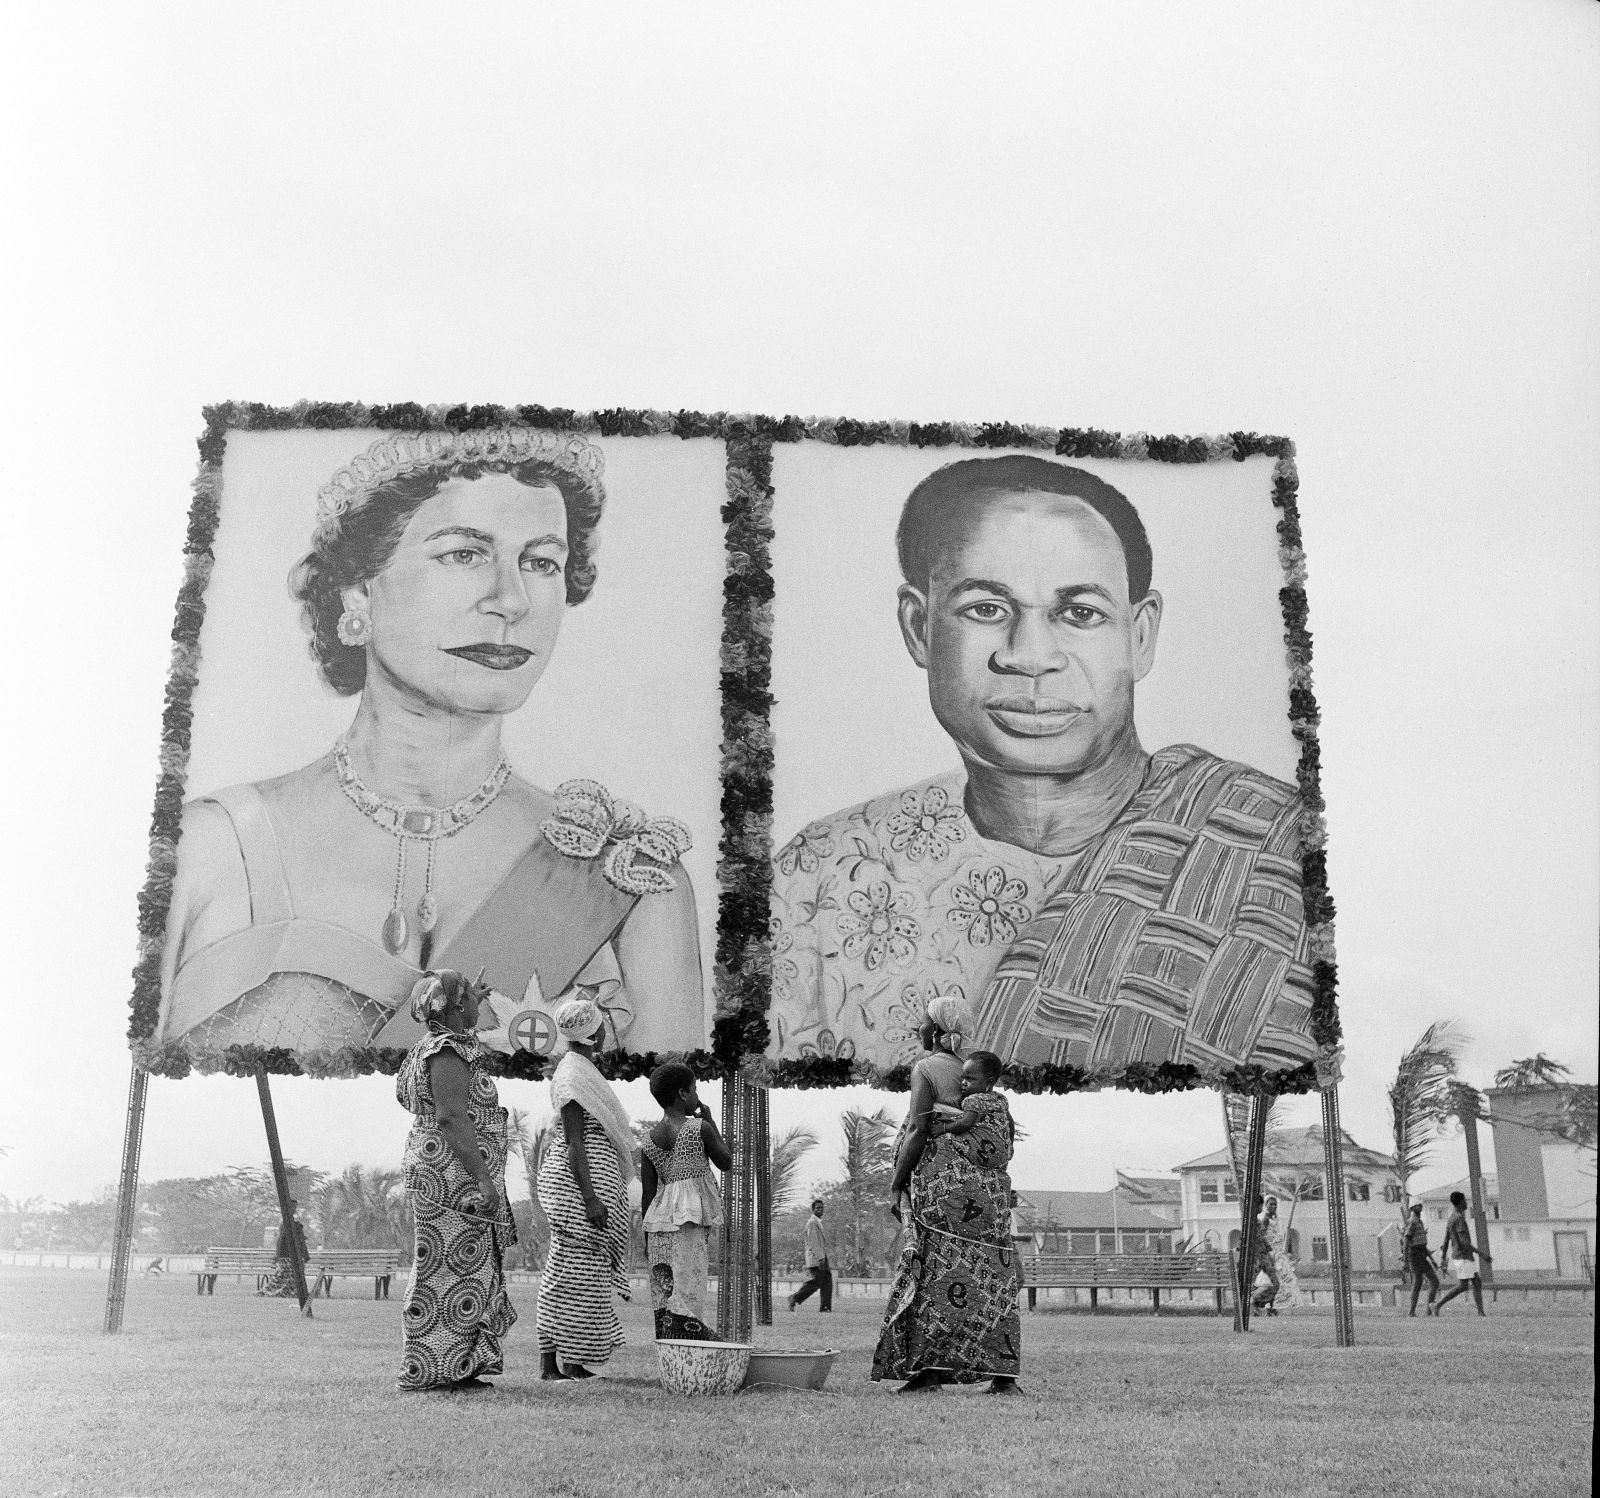 Queen Elizabeth II and President Kwame Nkrumah depicted on a billboard in Accra in 1961 ahead of the monarch’s visit to the former colony Ghana, which was then considered to be an “underdeveloped” country.